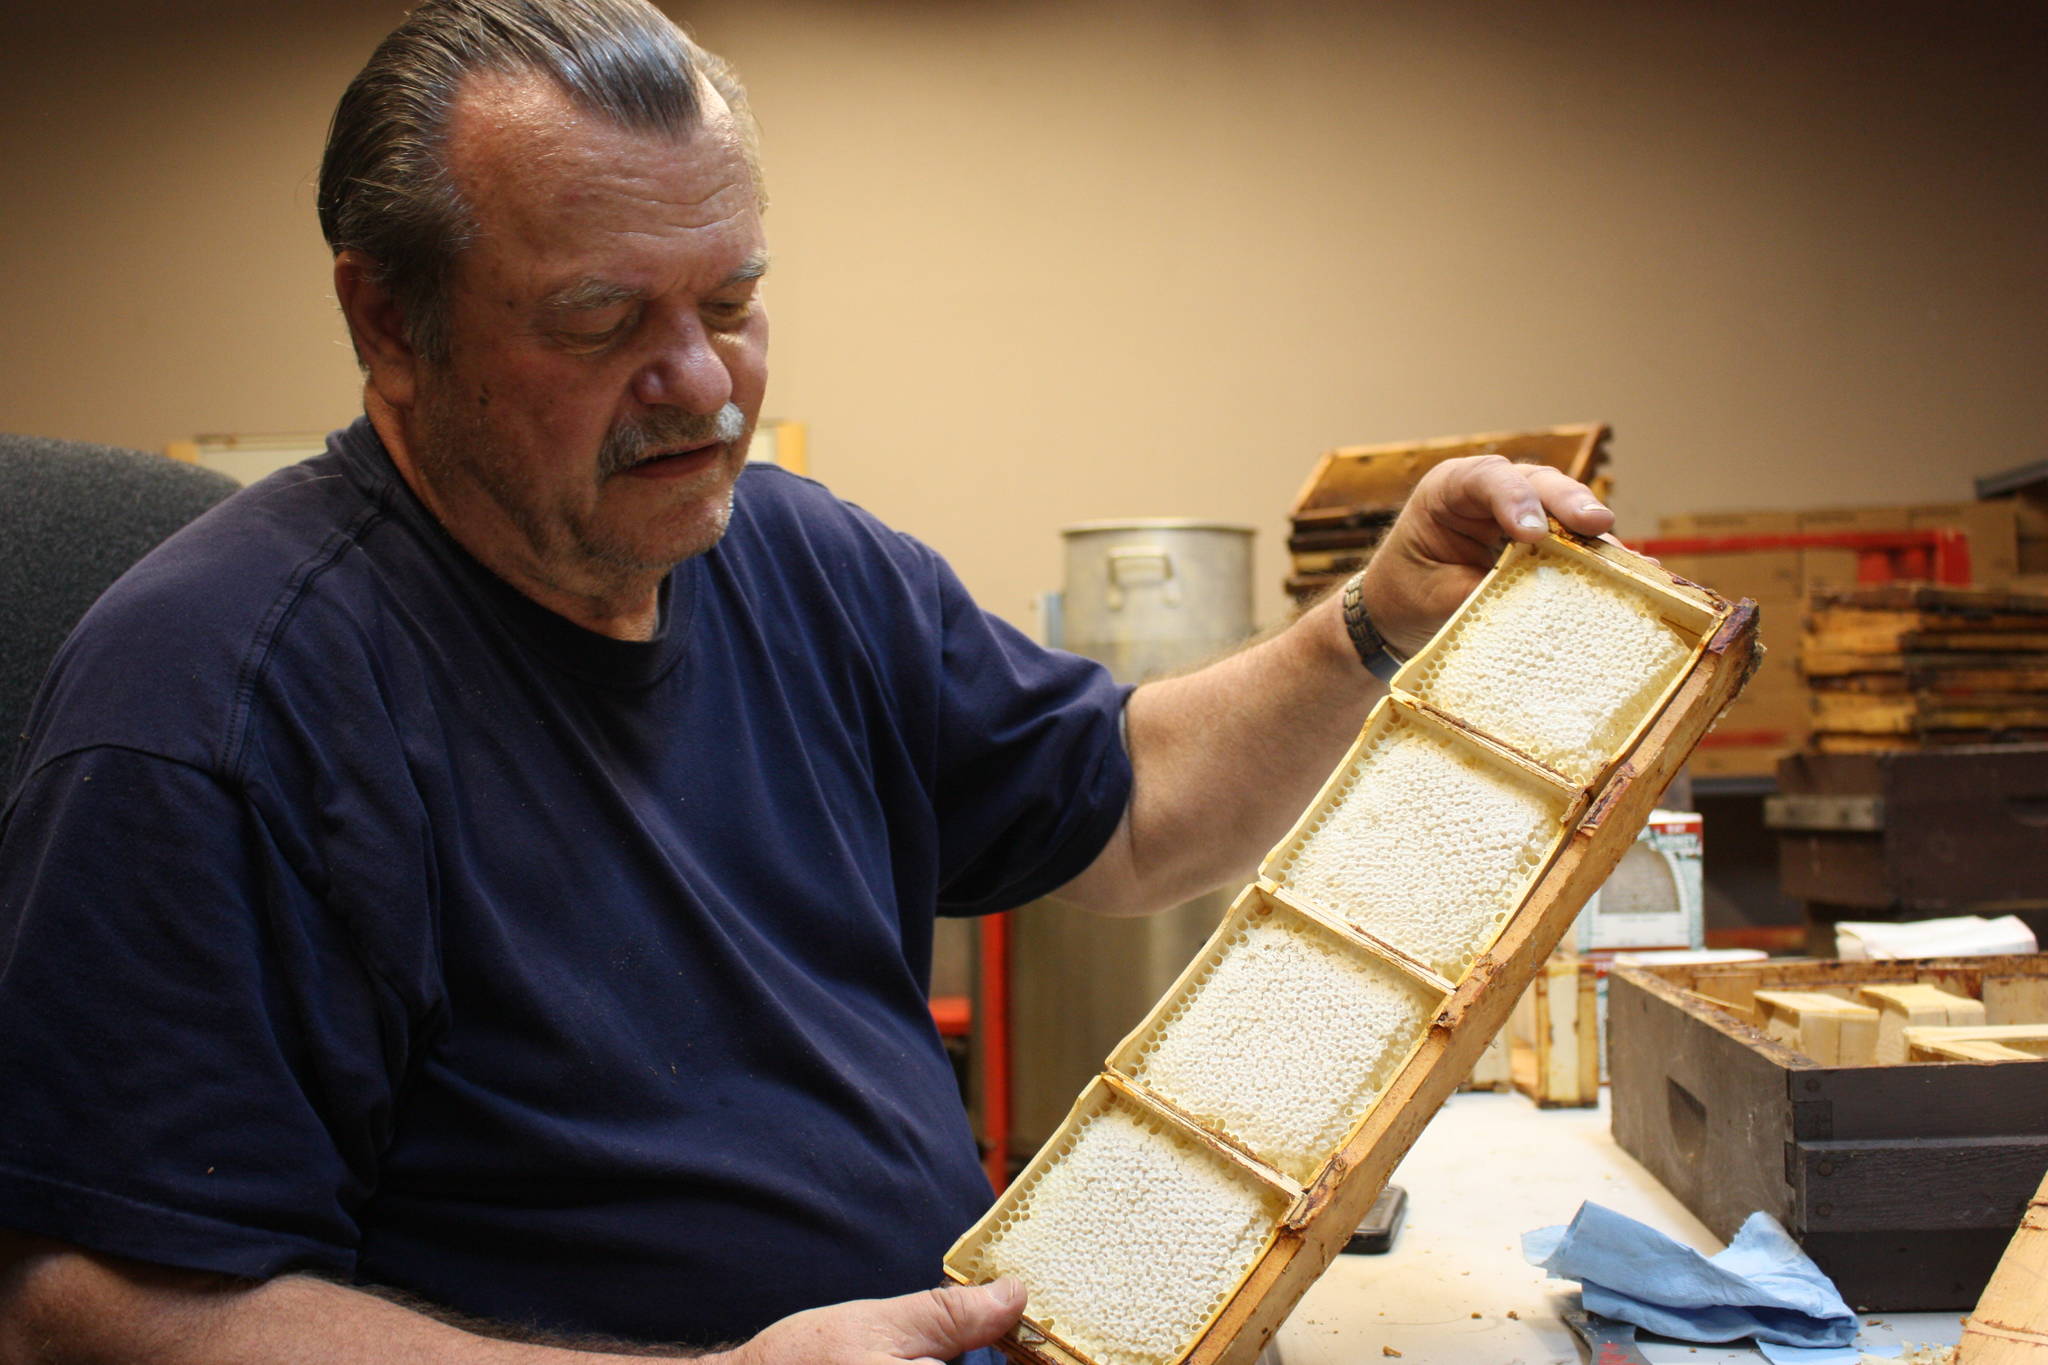 Dean Barnett, owner of Mr. B’s Honey, shows off some honeycomb that will be removed from the hive matrix, boxed and sold. Barnett has been a beekeeper for decades, first as a hobby and now as a retirement occupation. Aaron Kunkler/Redmond Reporter